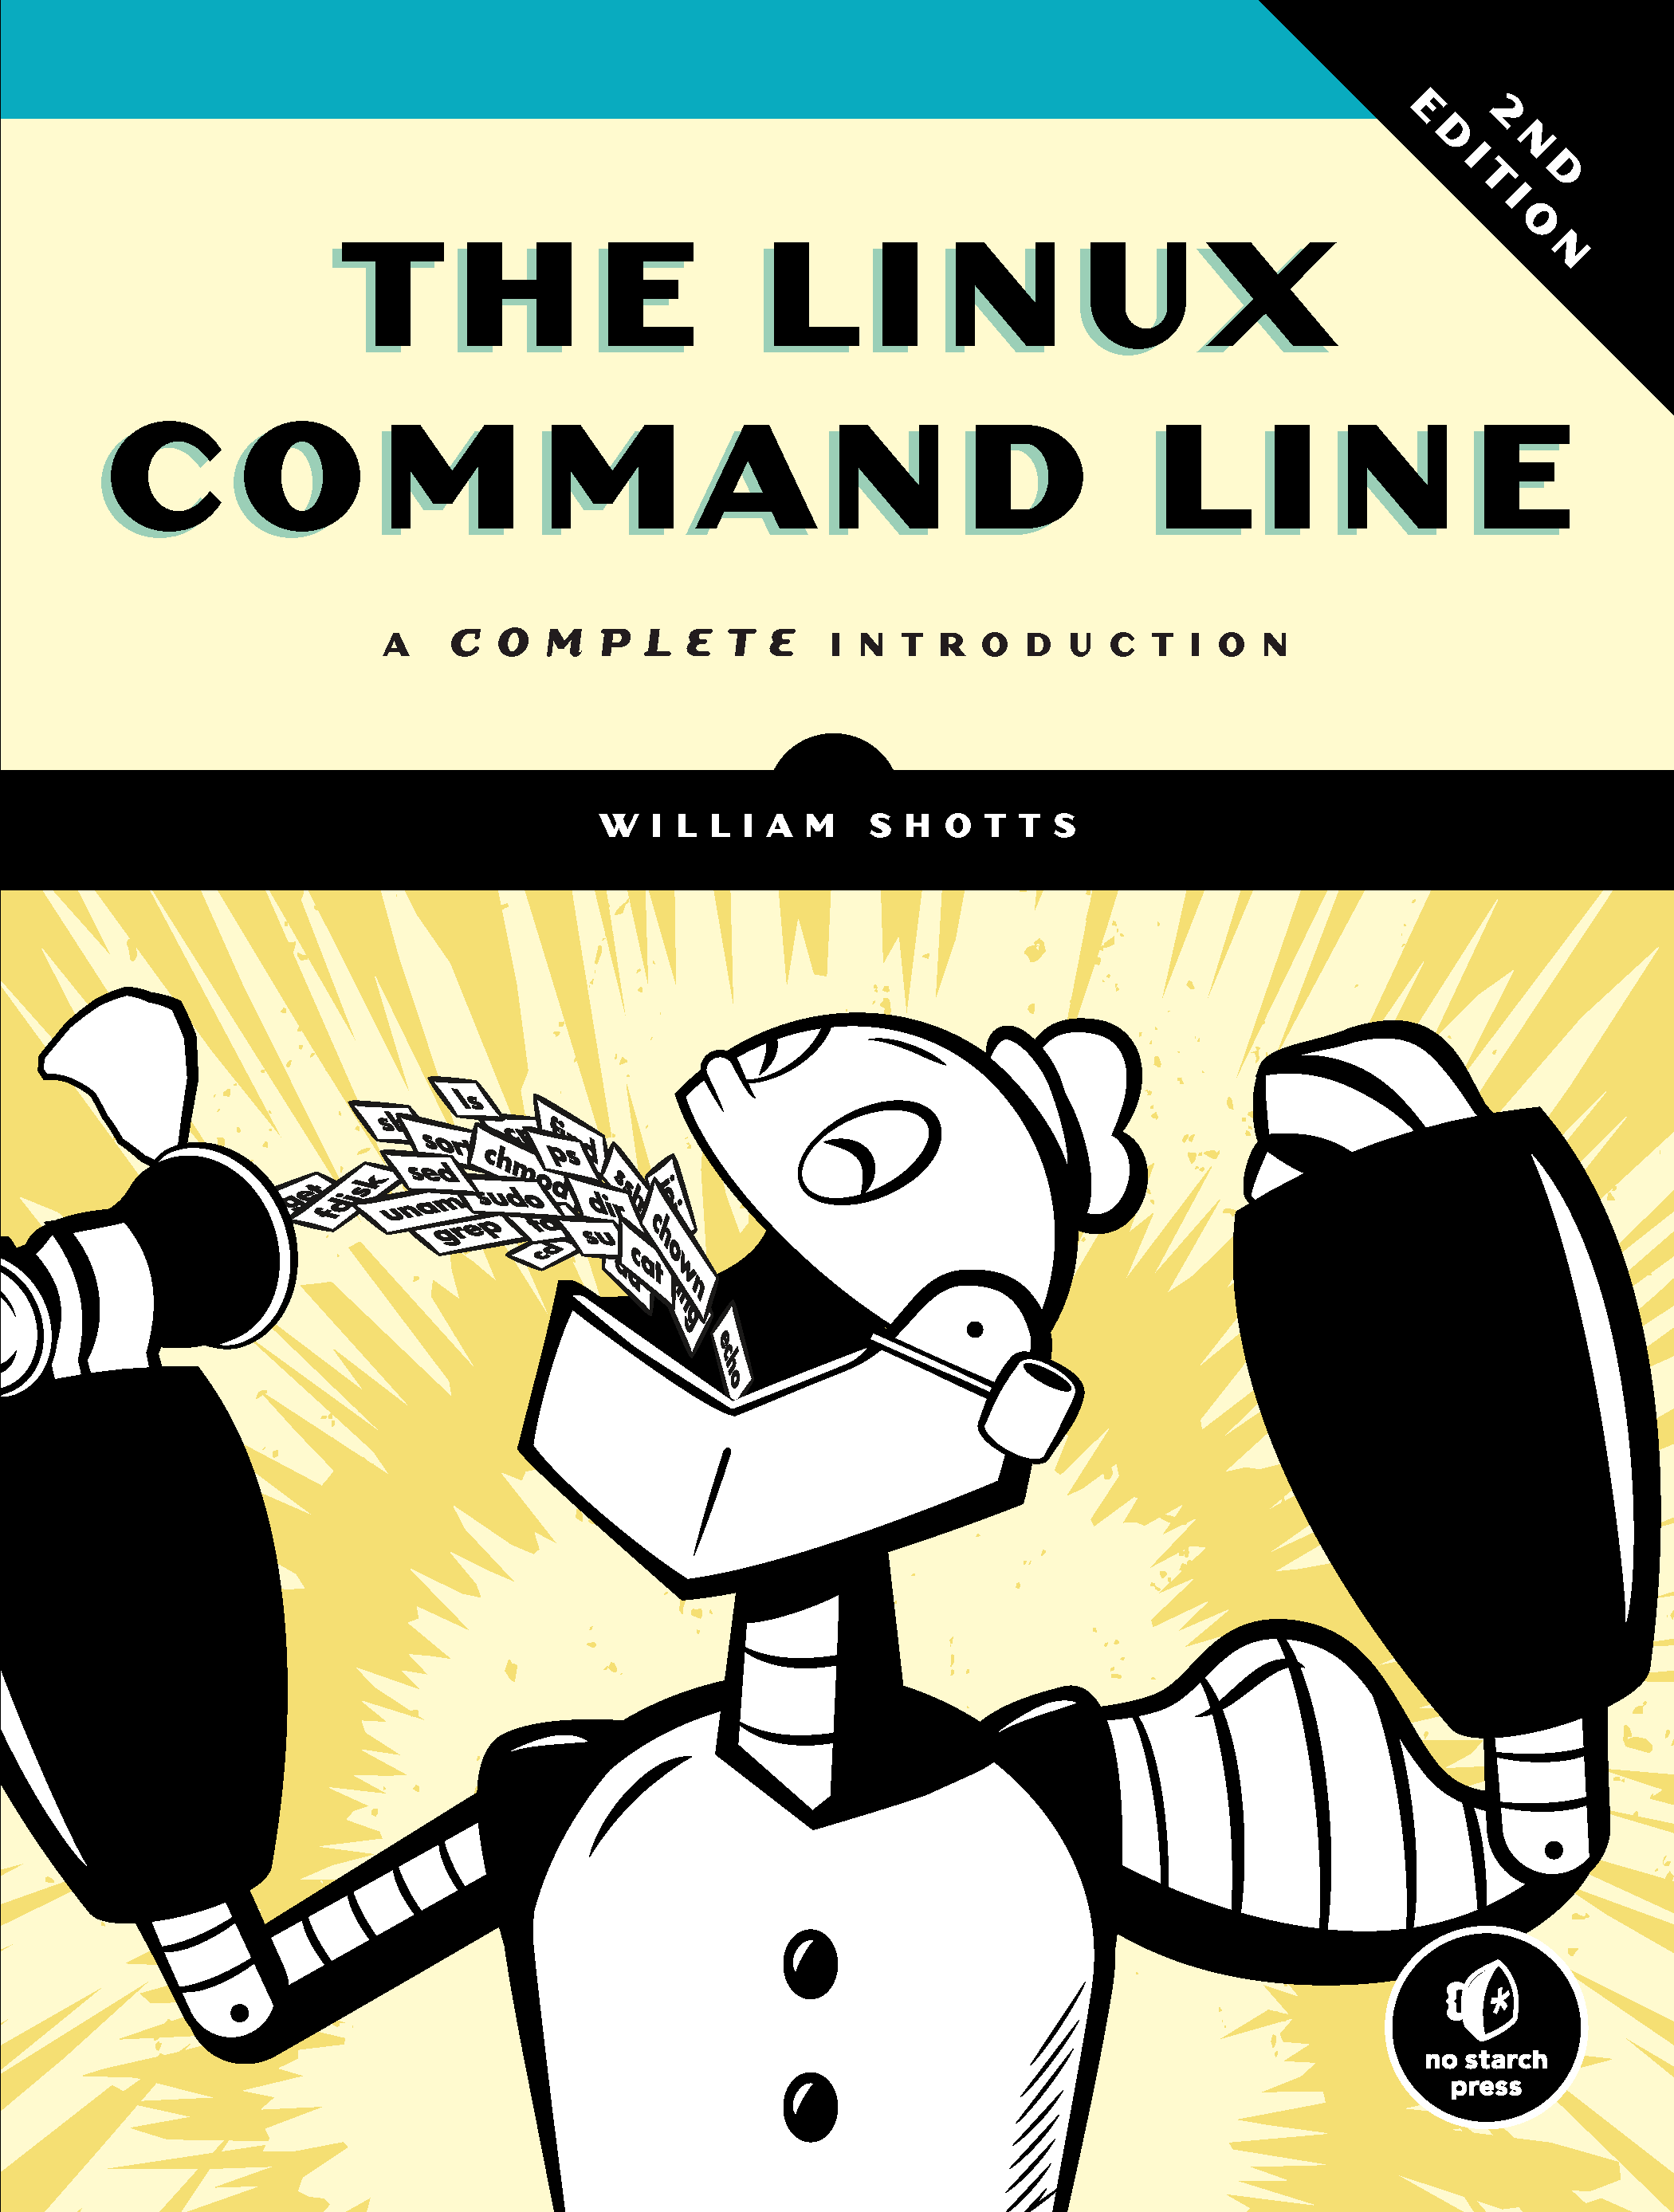 The Linux Command Line Book, by William shotts